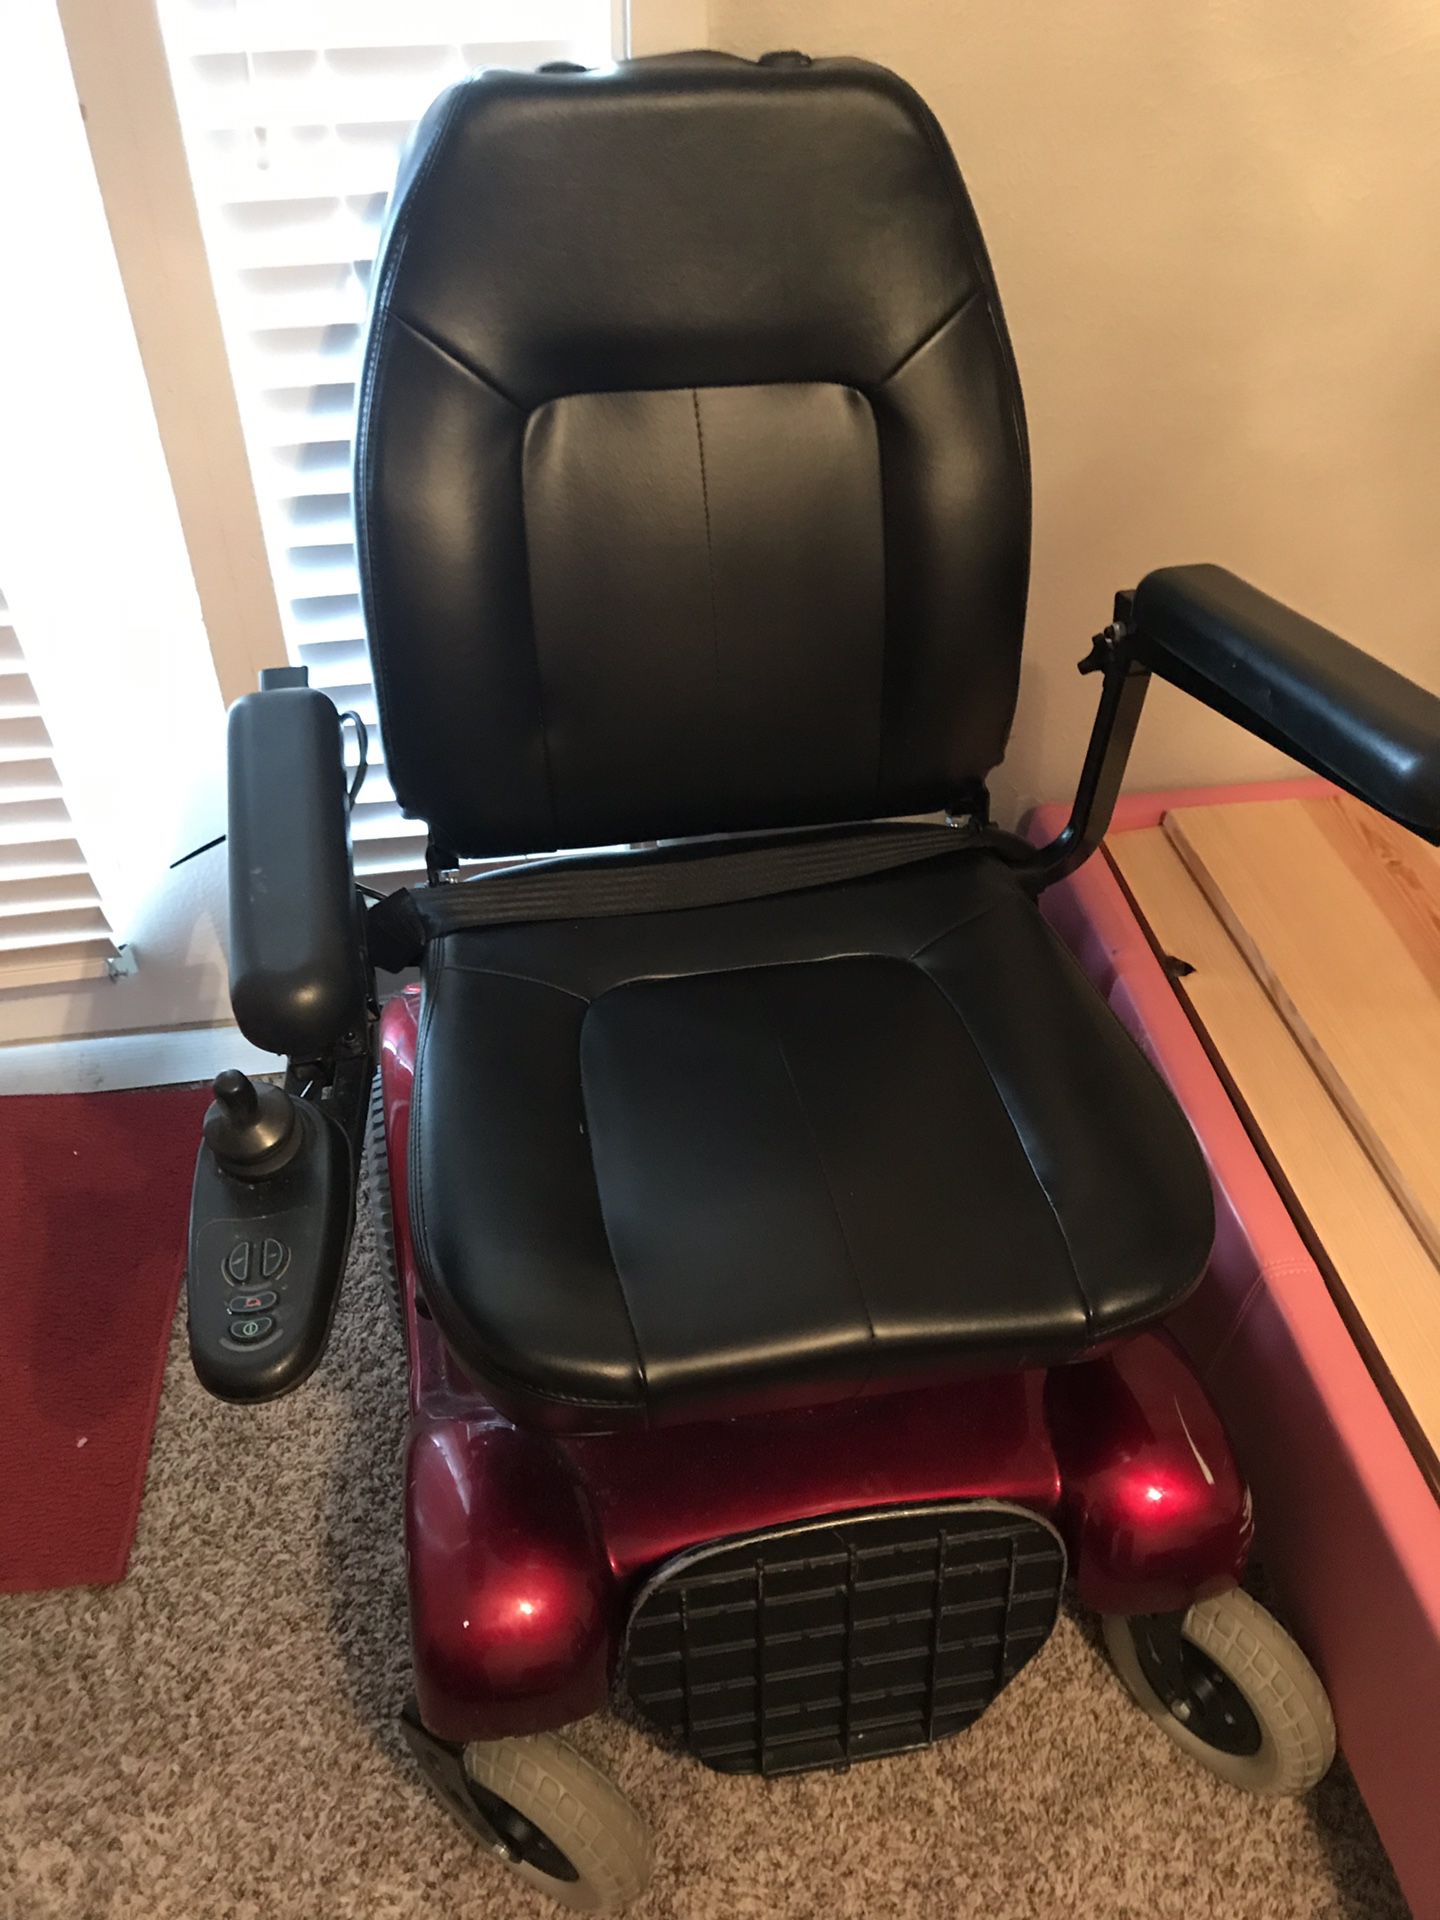 Very good condition power chair buying as a used we never used it very clean good battery with the charger